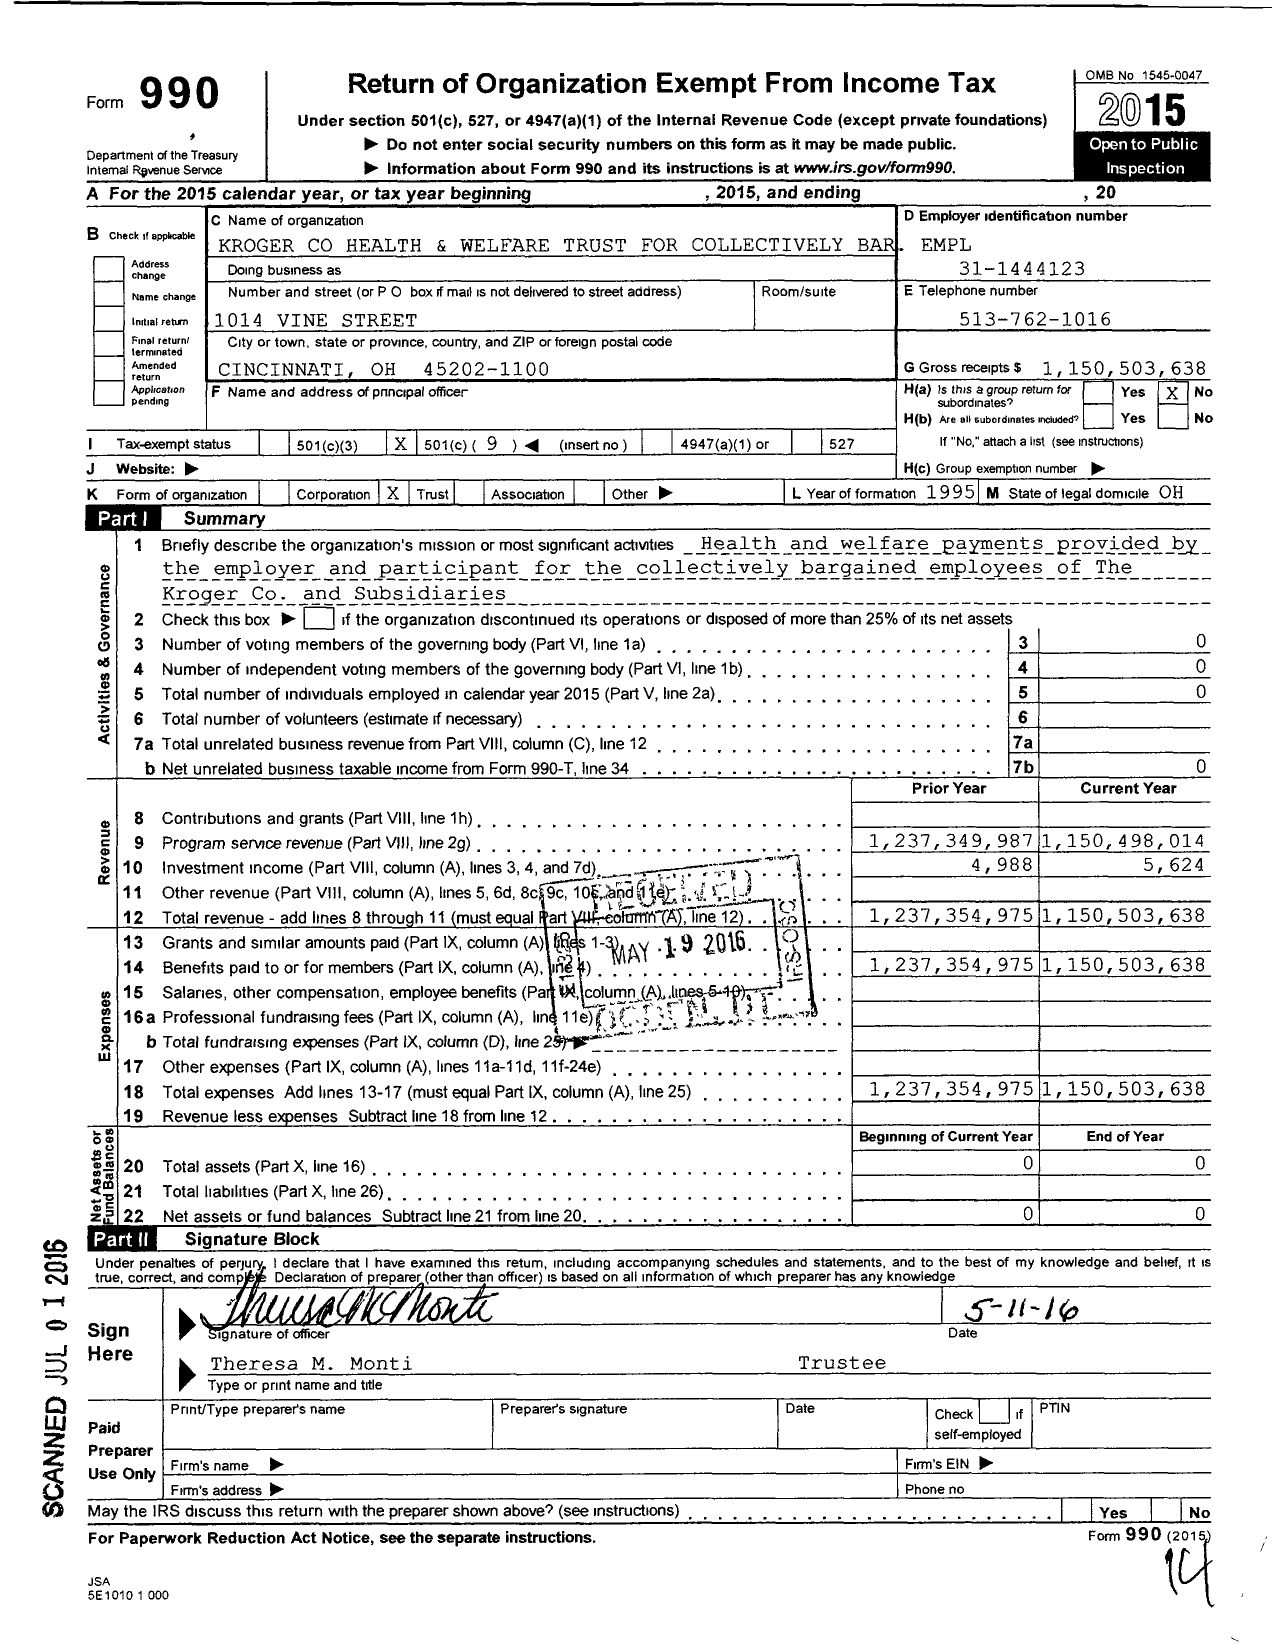 Image of first page of 2015 Form 990O for Kroger Health and Welfare Trust for Collectively Bar Empl